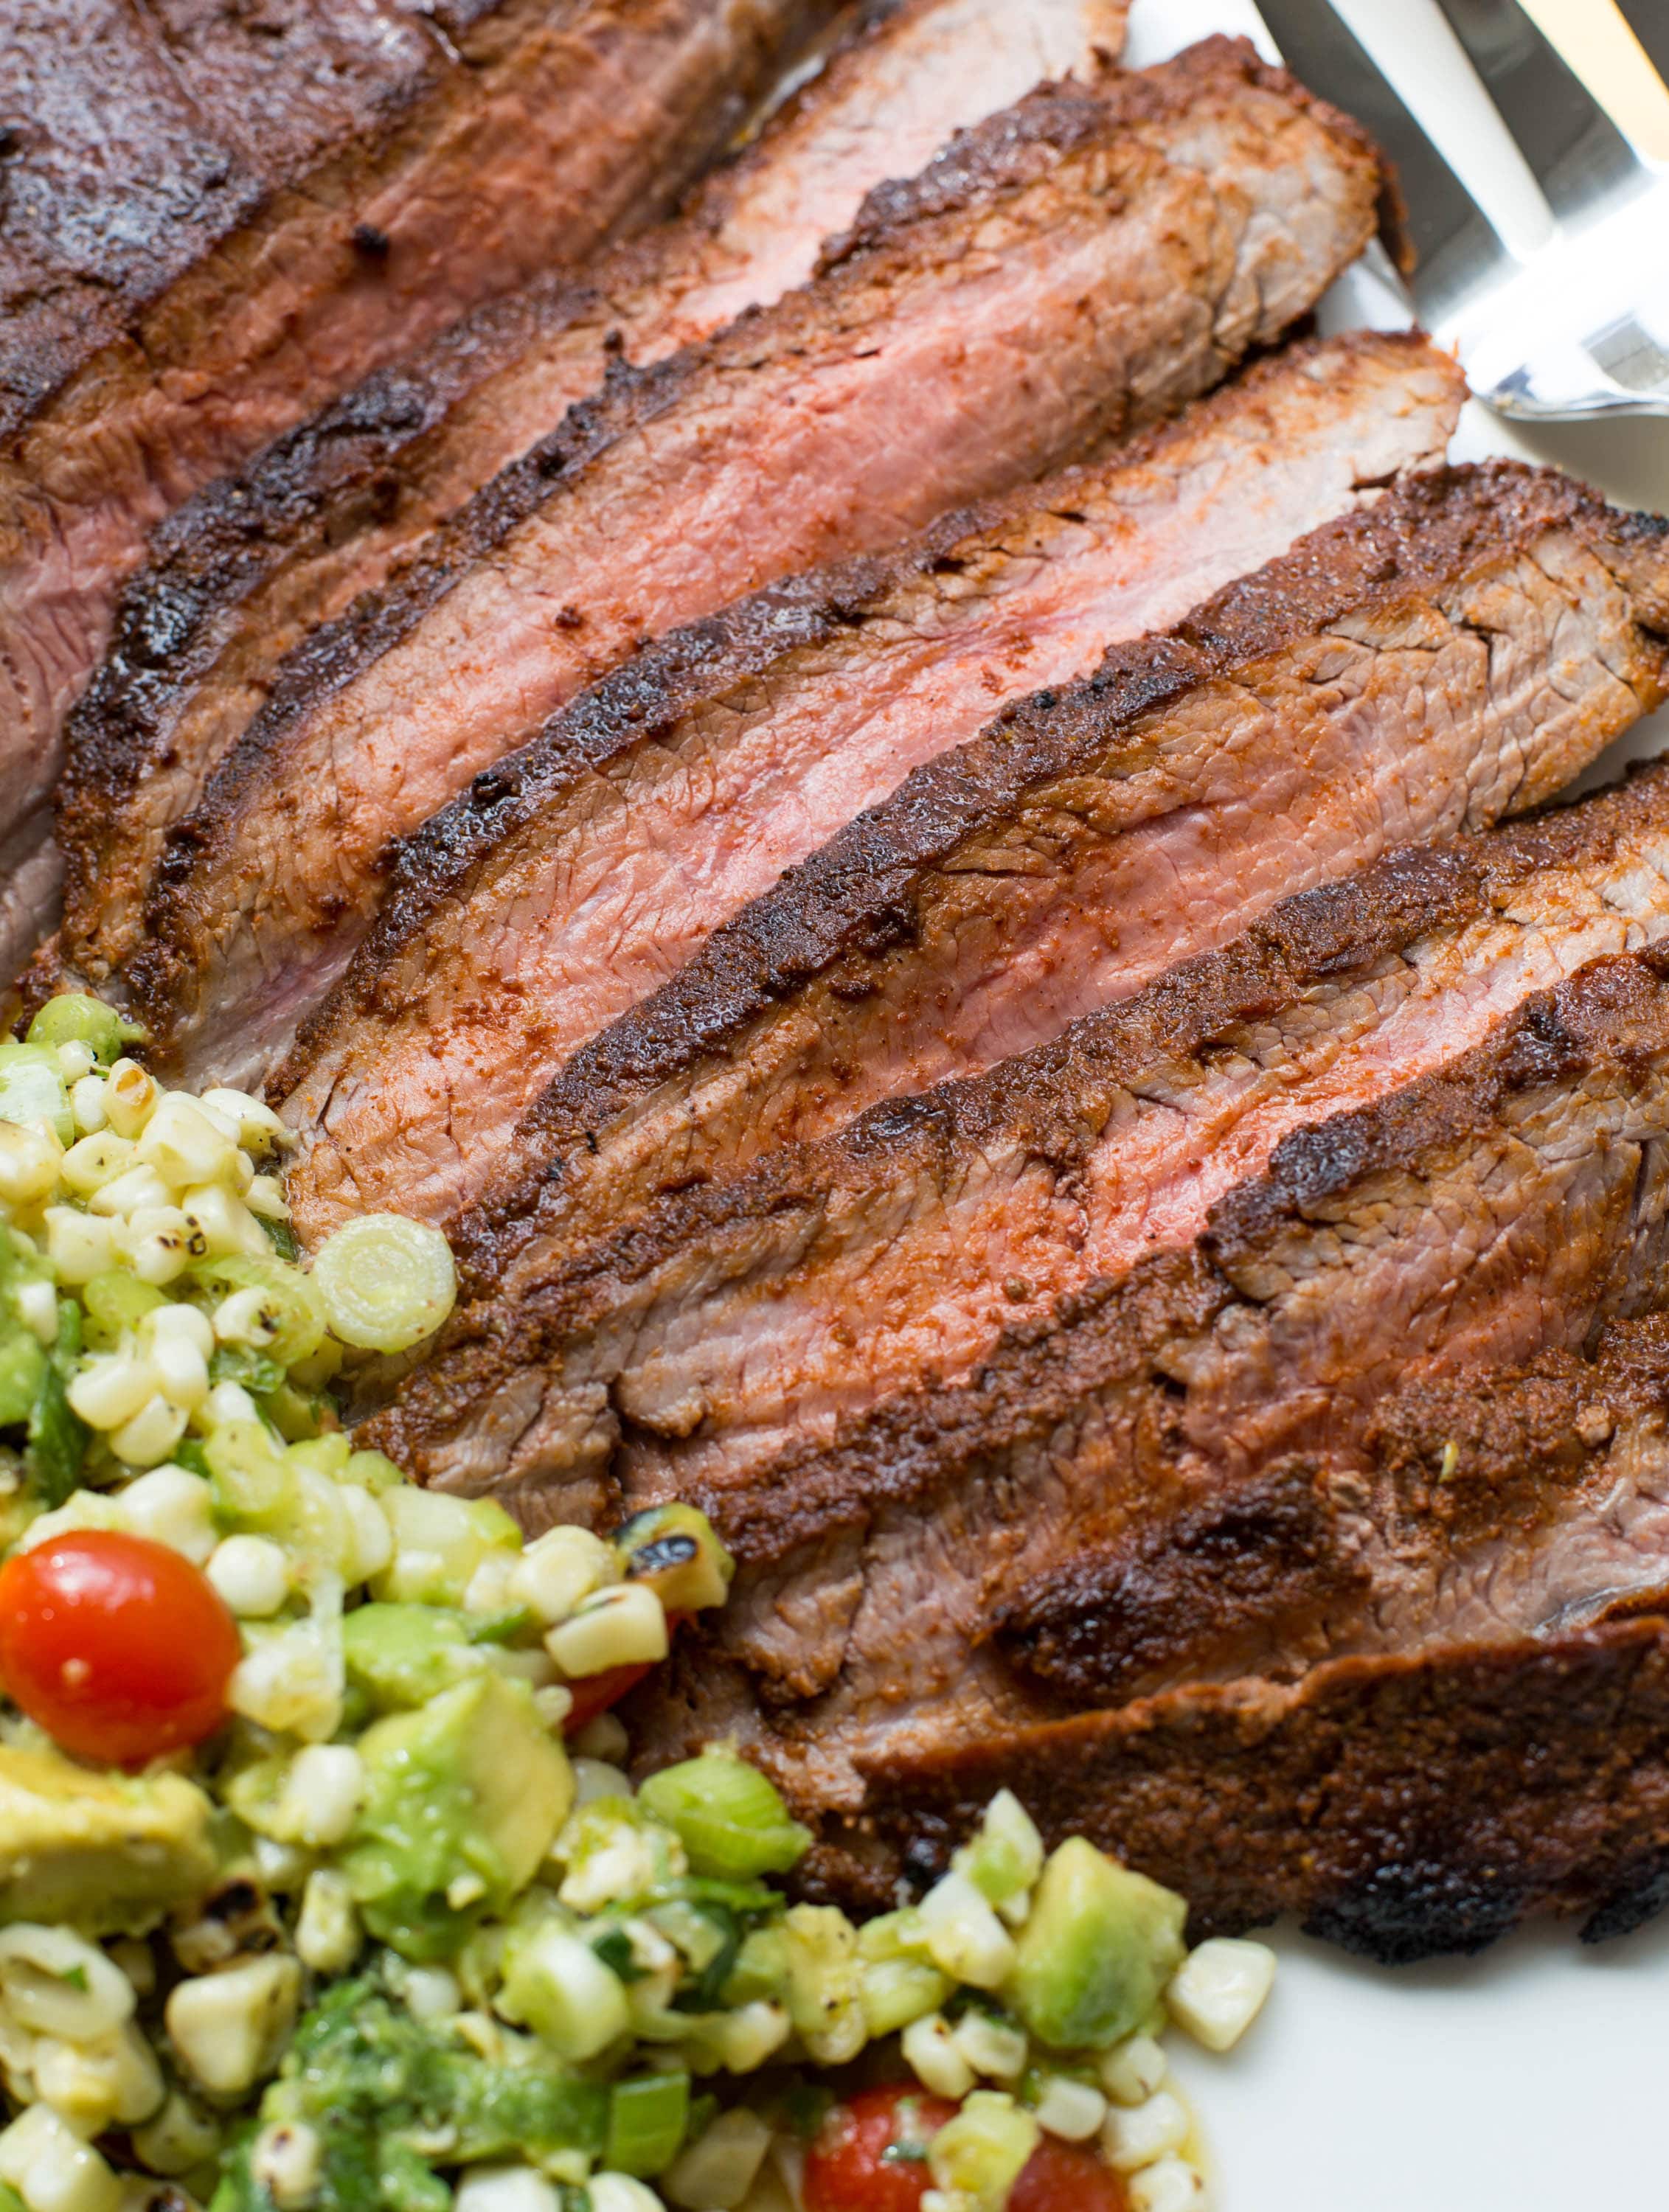 Slices of Chili Rubbed Flank Steak on a tray with Corn, Tomato and Avocado Salad.